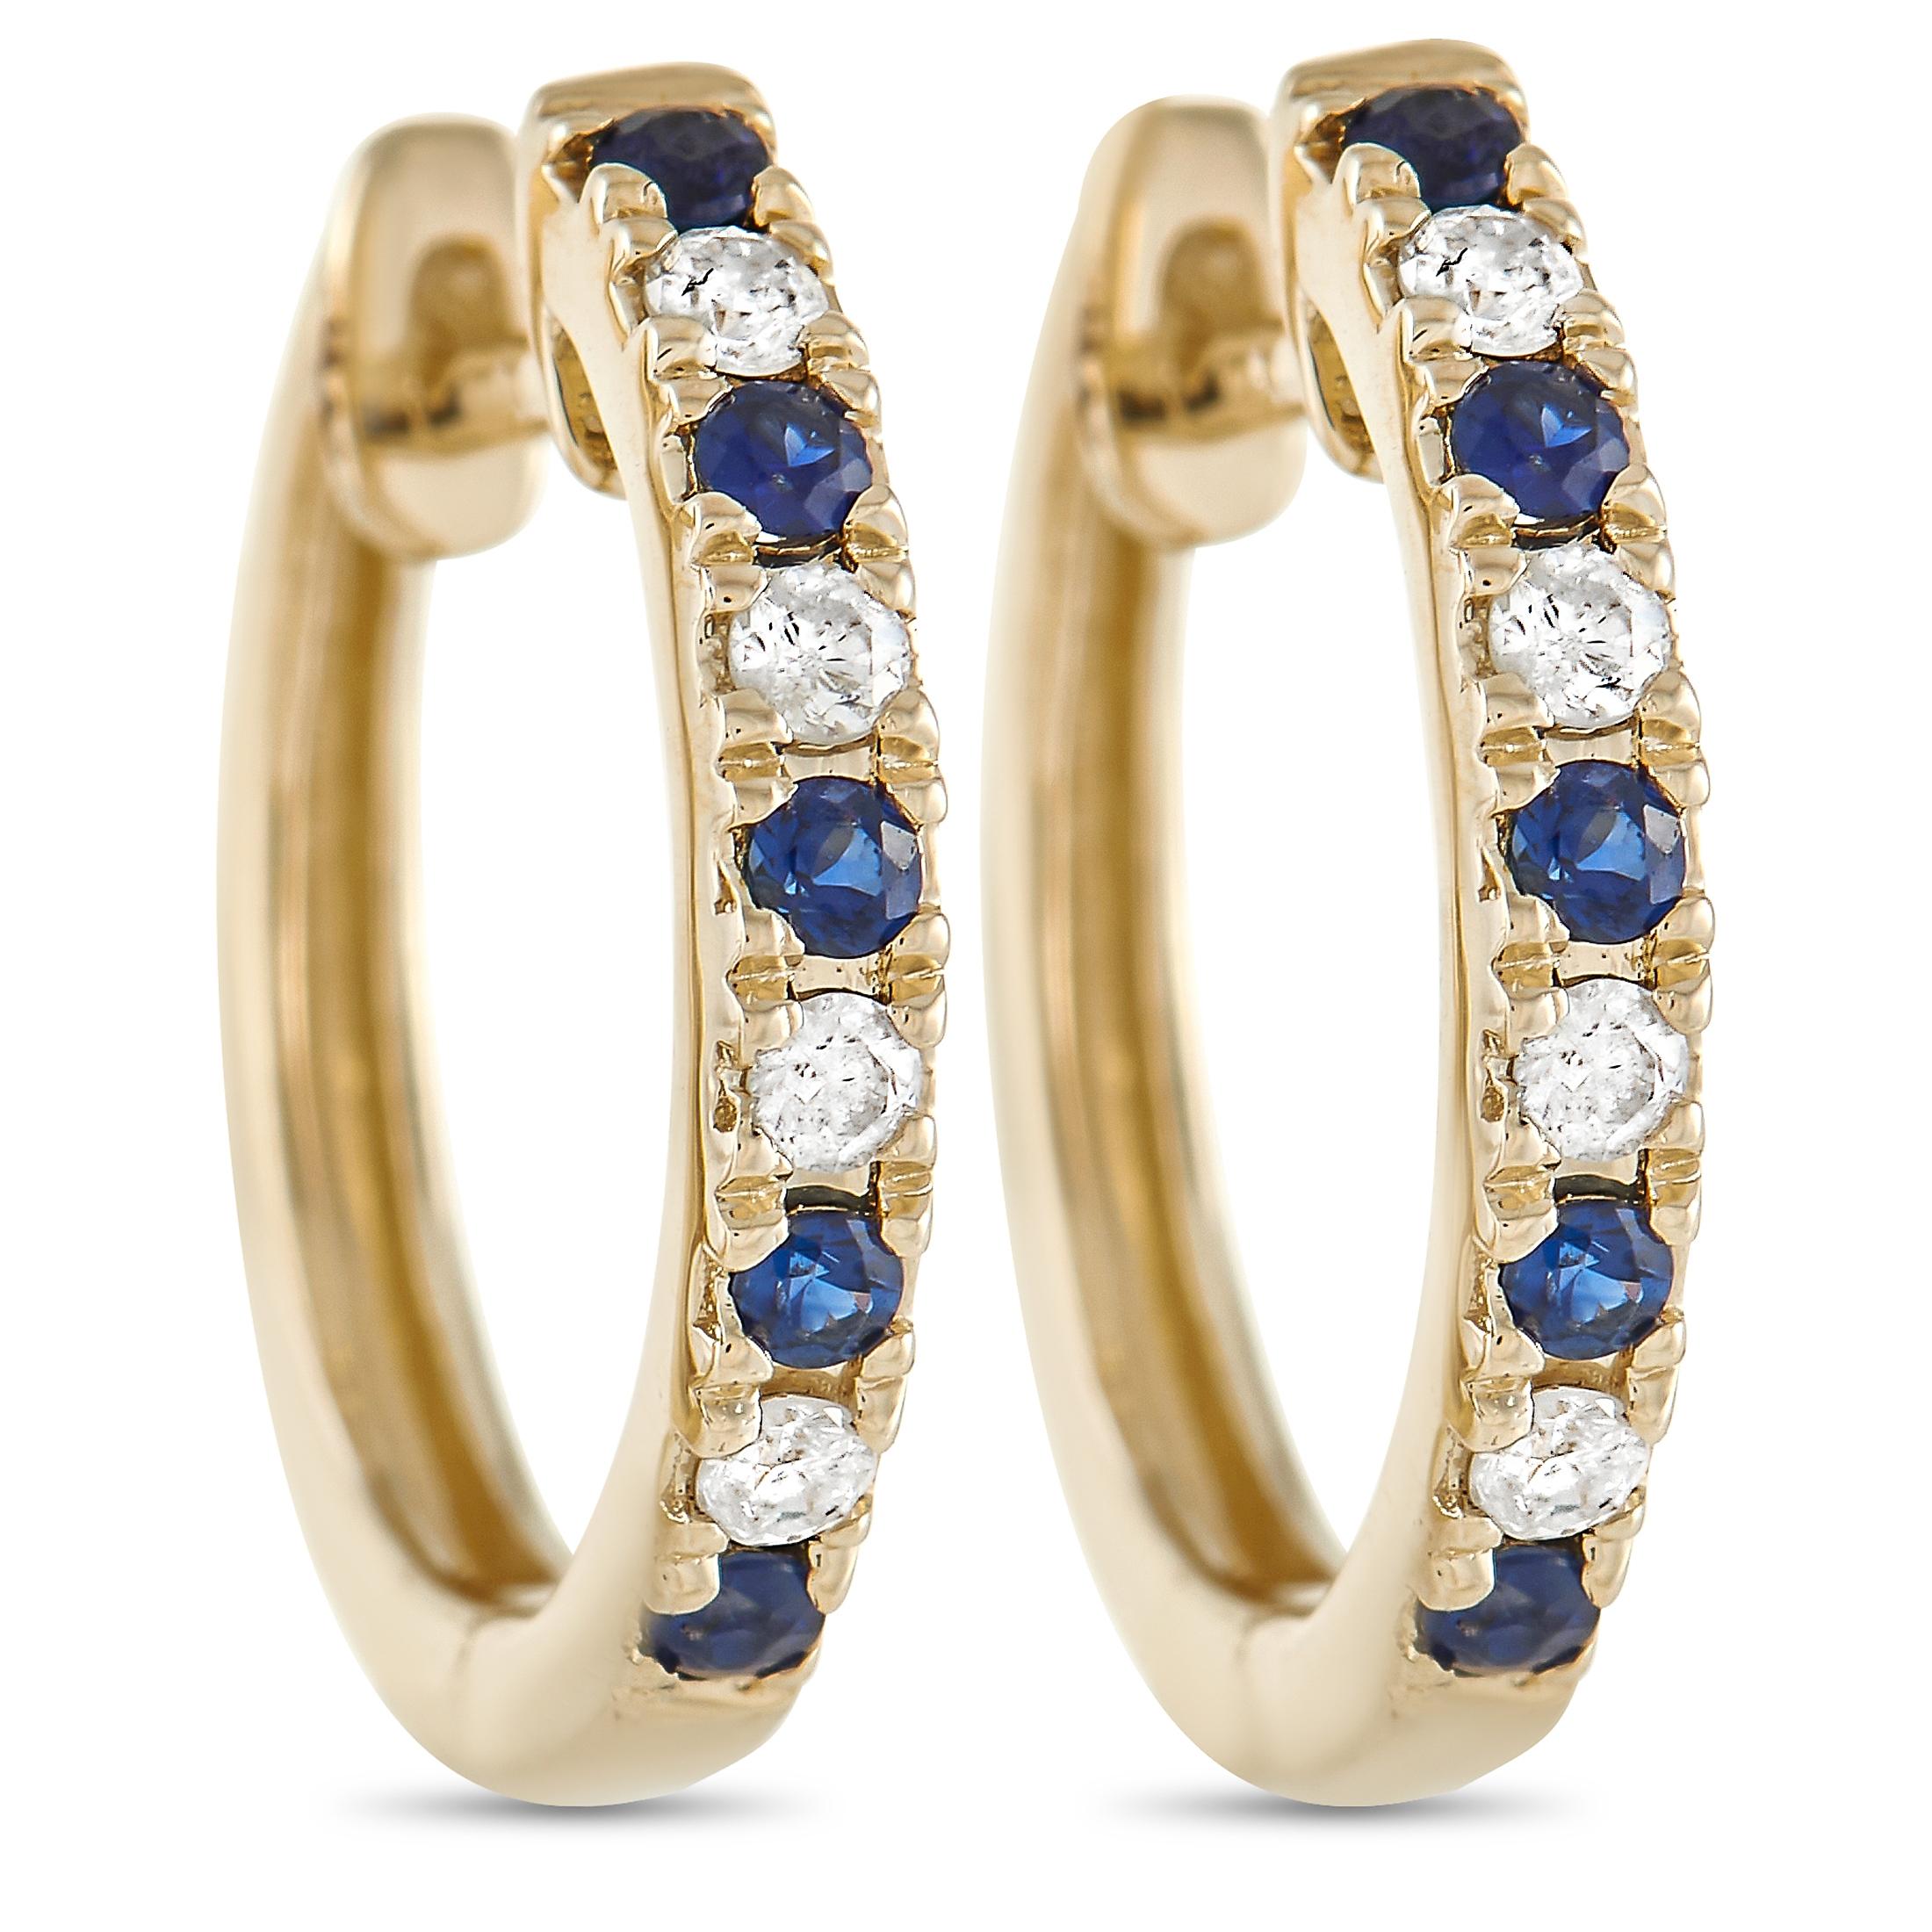 Mixed Cut LB Exclusive 14K Yellow Gold 0.11 Ct Diamond and Sapphire Hoop Earrings